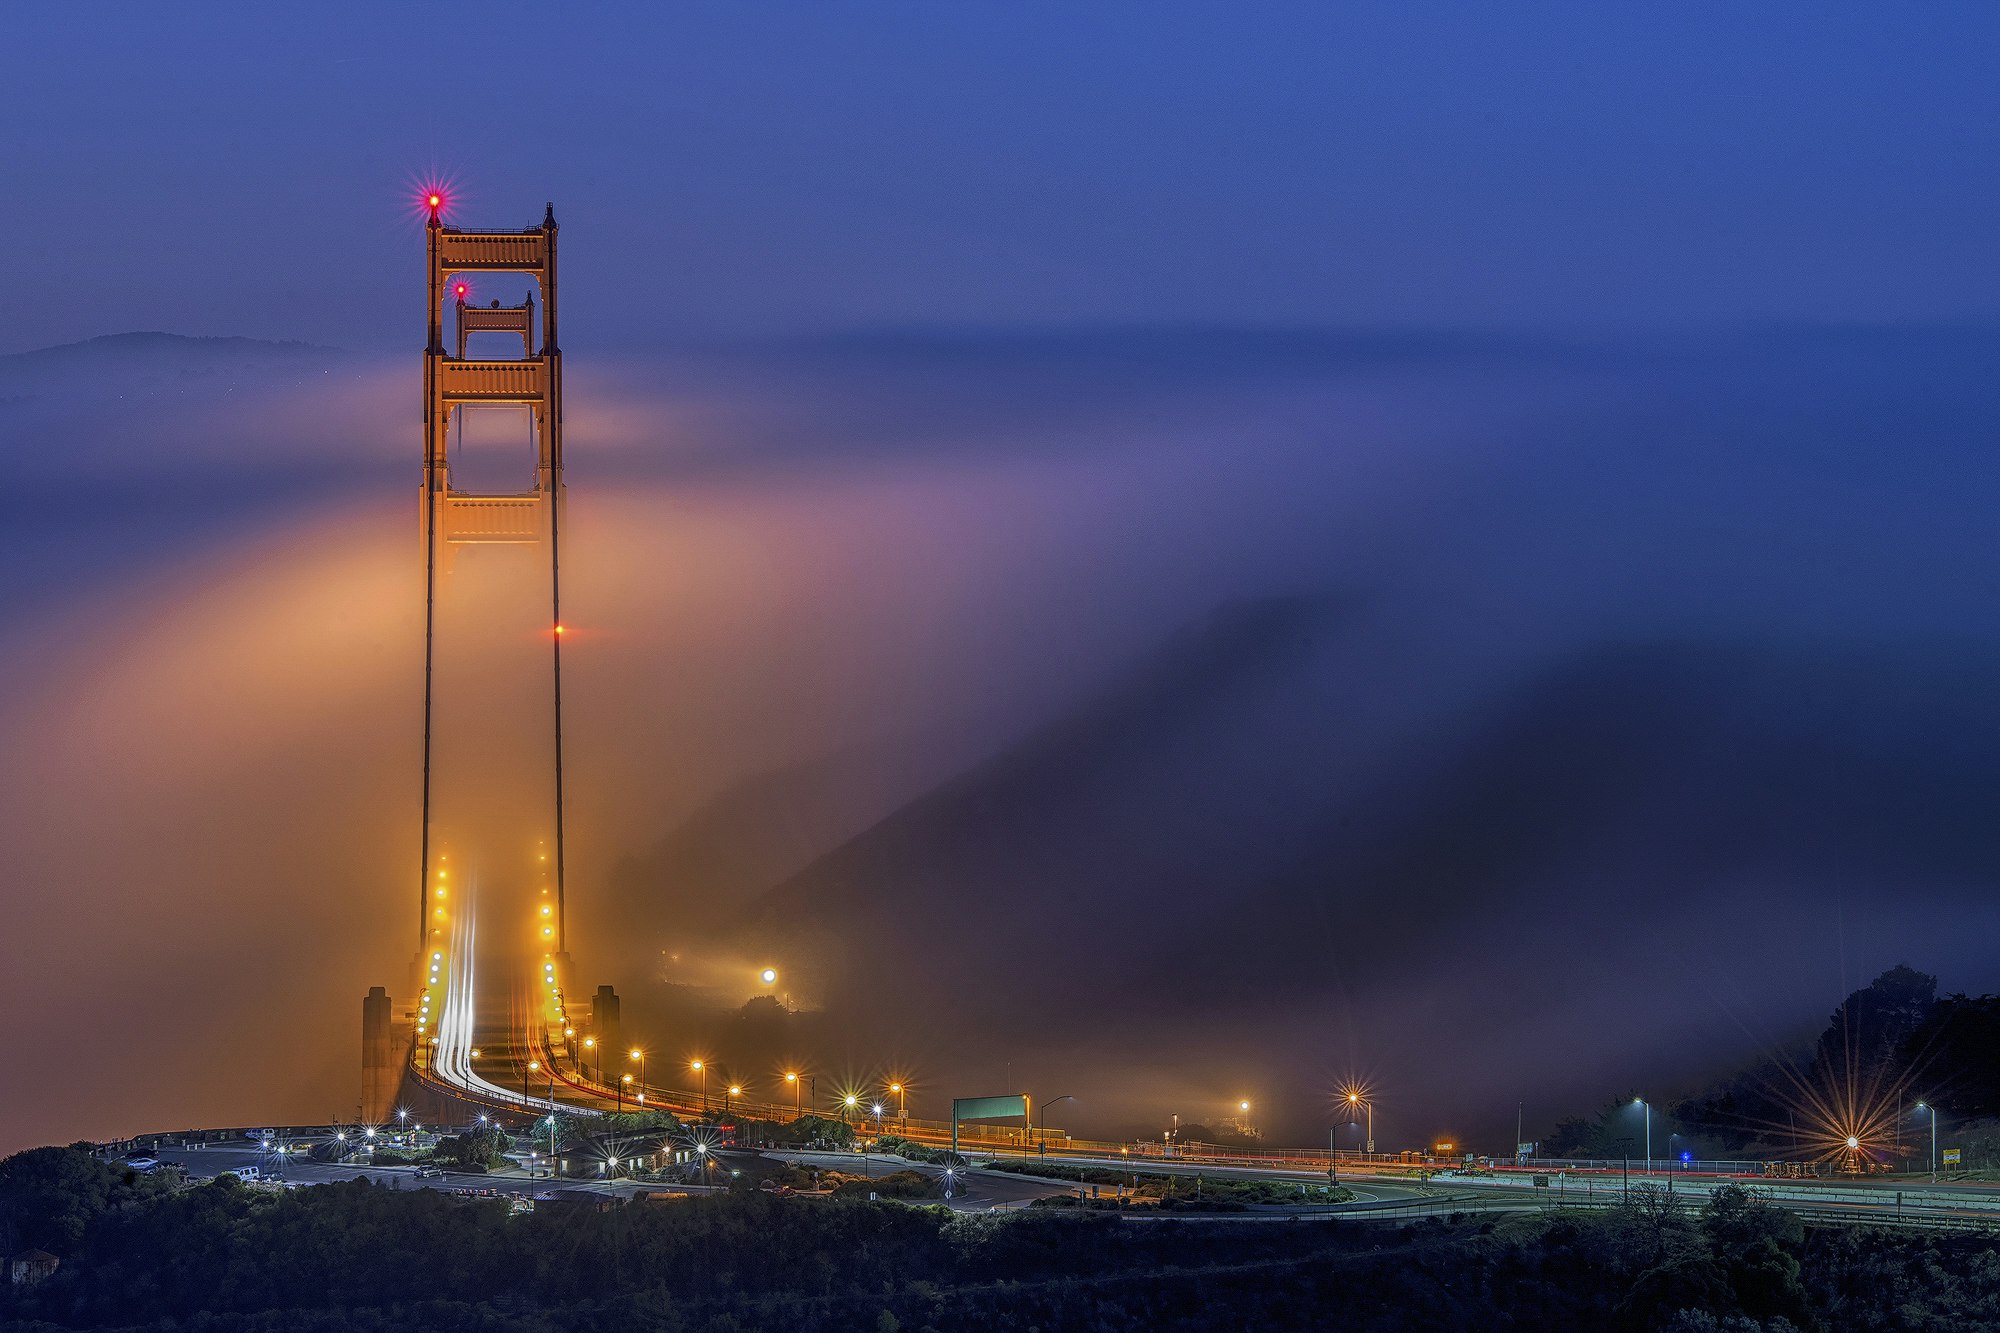 A picture of San Francisco's Golden Gate bridge emerging from the fog at sunset